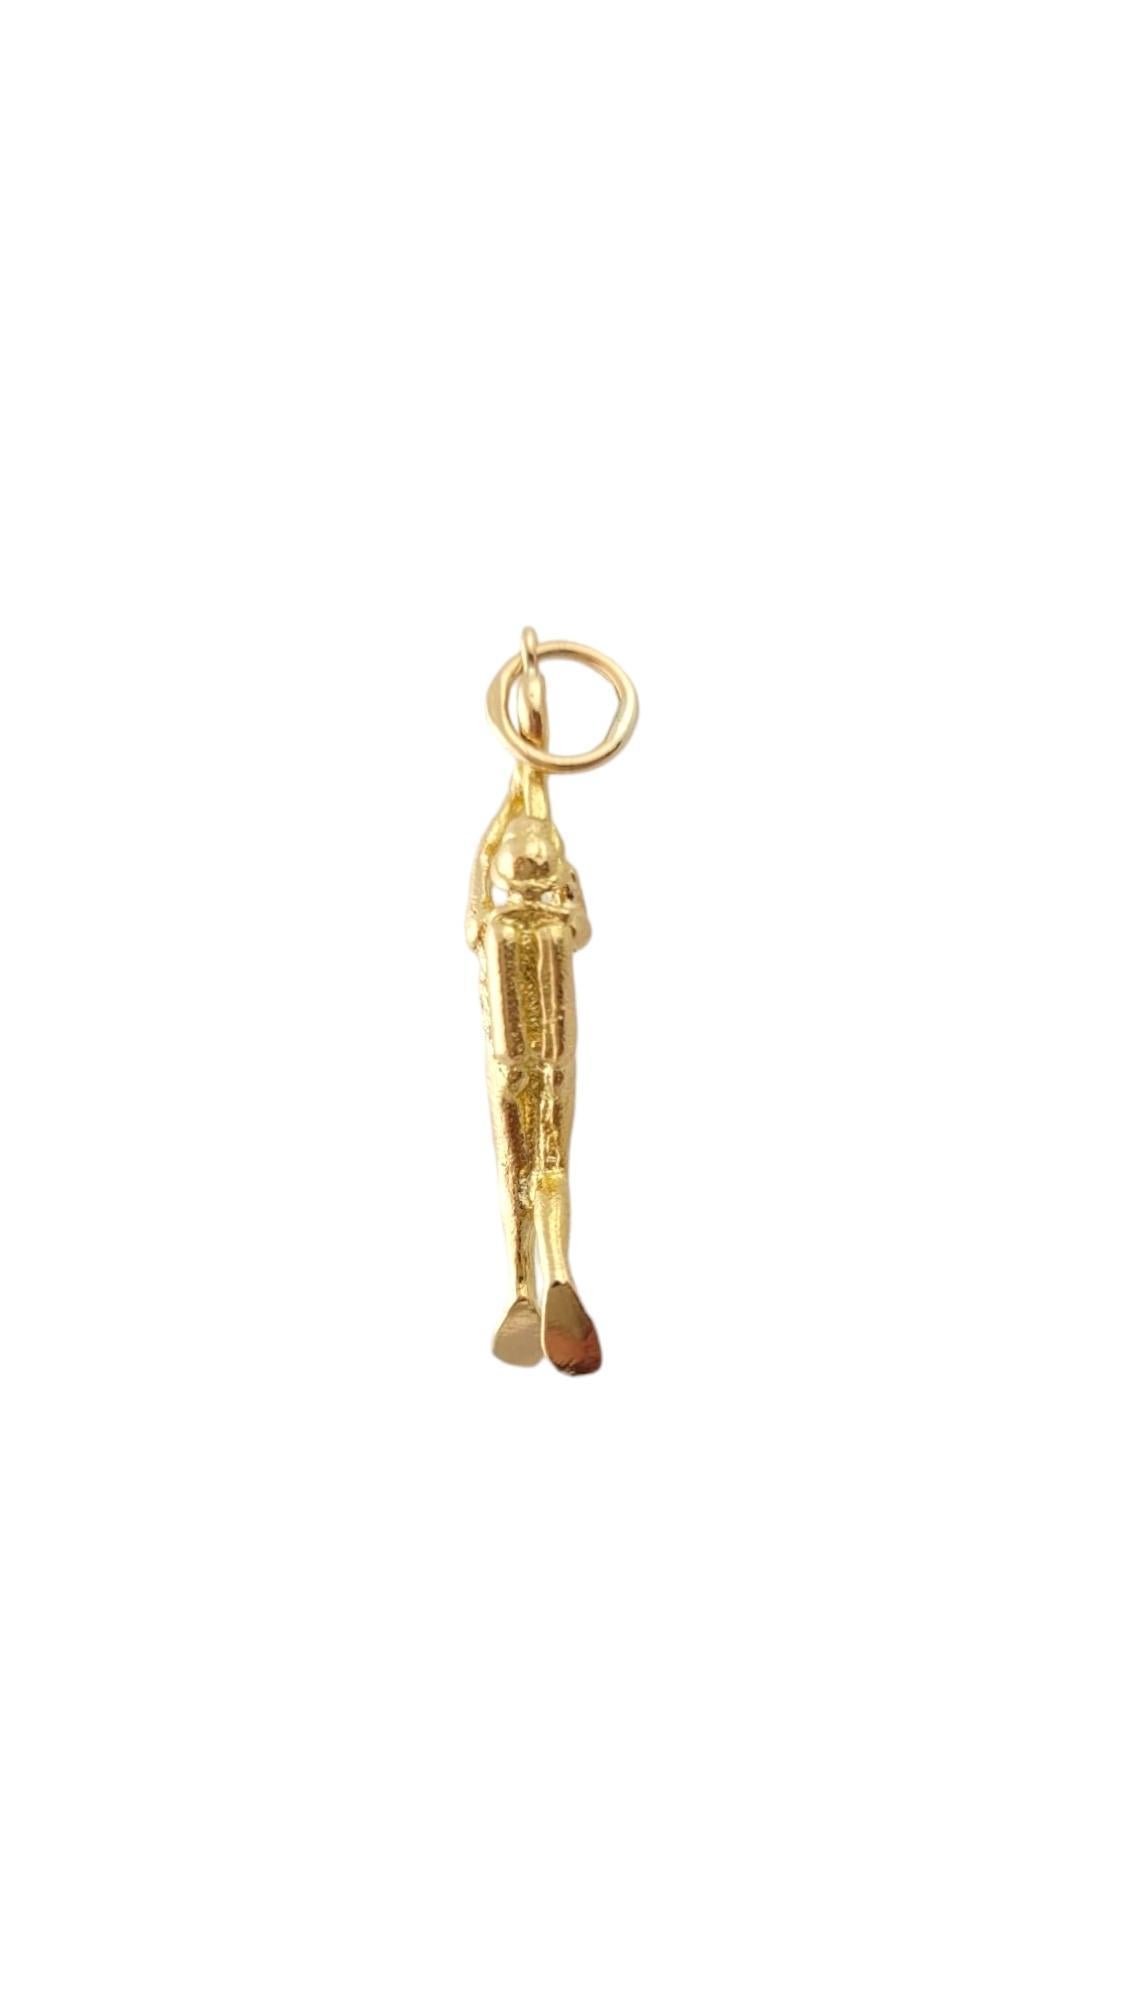 Vintage 14K Yellow Gold Scuba Diver Charm

3D charm of scuba diver in 14 karat yellow gold.

Hallmark: 14KT

Weight: 2.27 g/ 1.46 dwt.

Measurements: 28.54 mm X 4.98 mm

Very good condition, professionally polished.

Will come packaged in a gift box